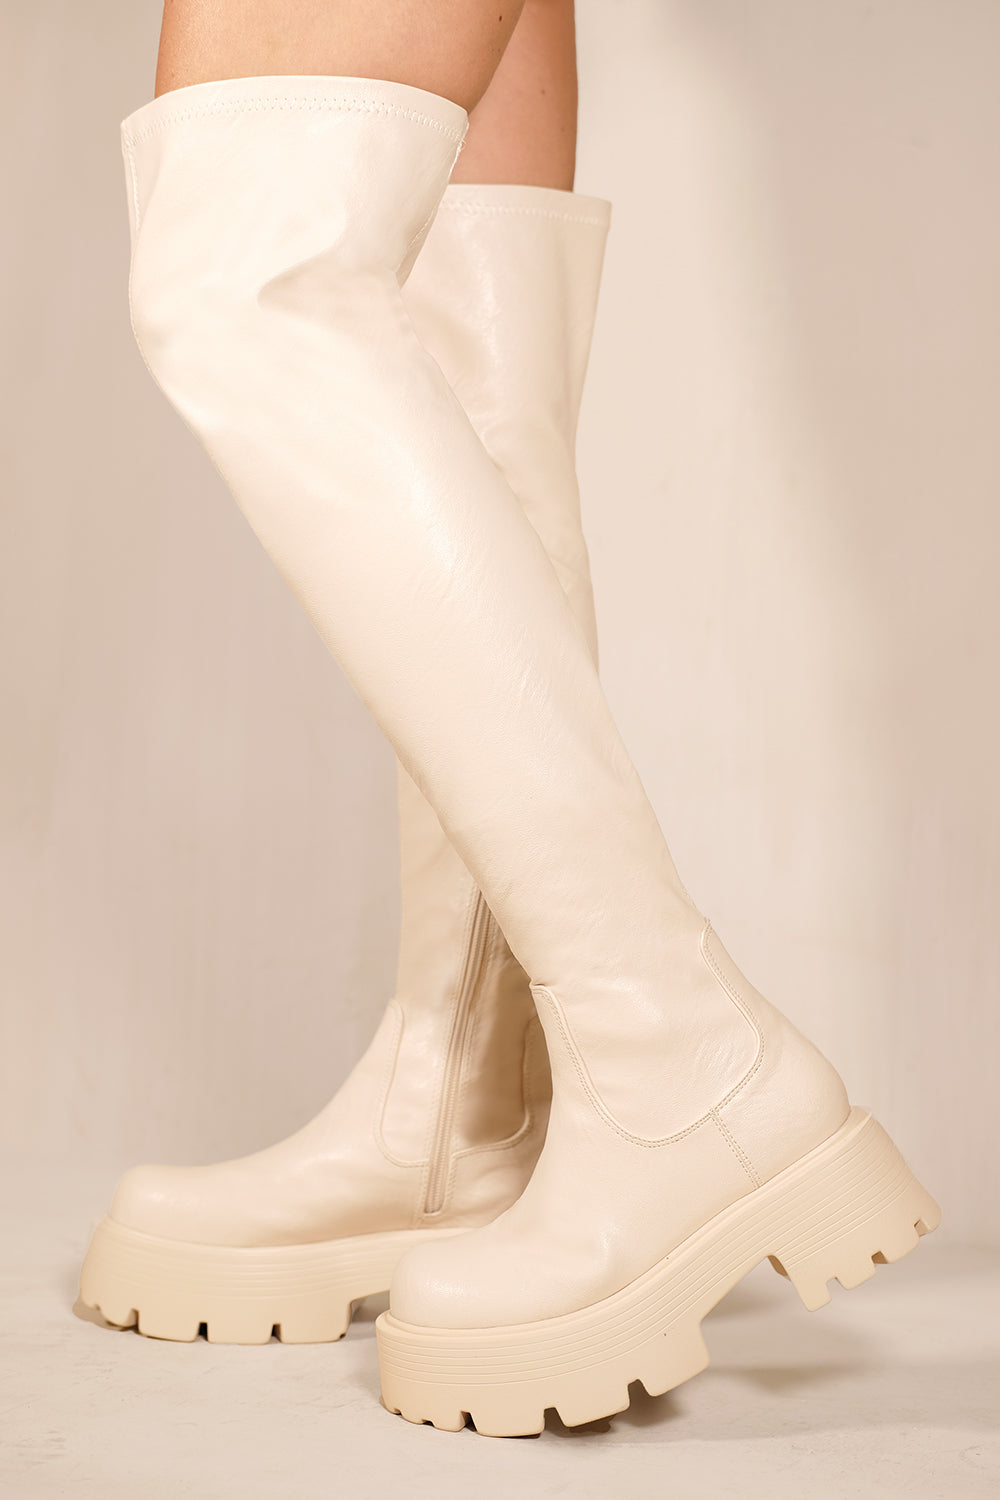 TILLEY CHUNKY CHELASEA CALF HIGH BOOTS WITH SIDE ZIP IN IVORY CREAM FAUX LEATHER